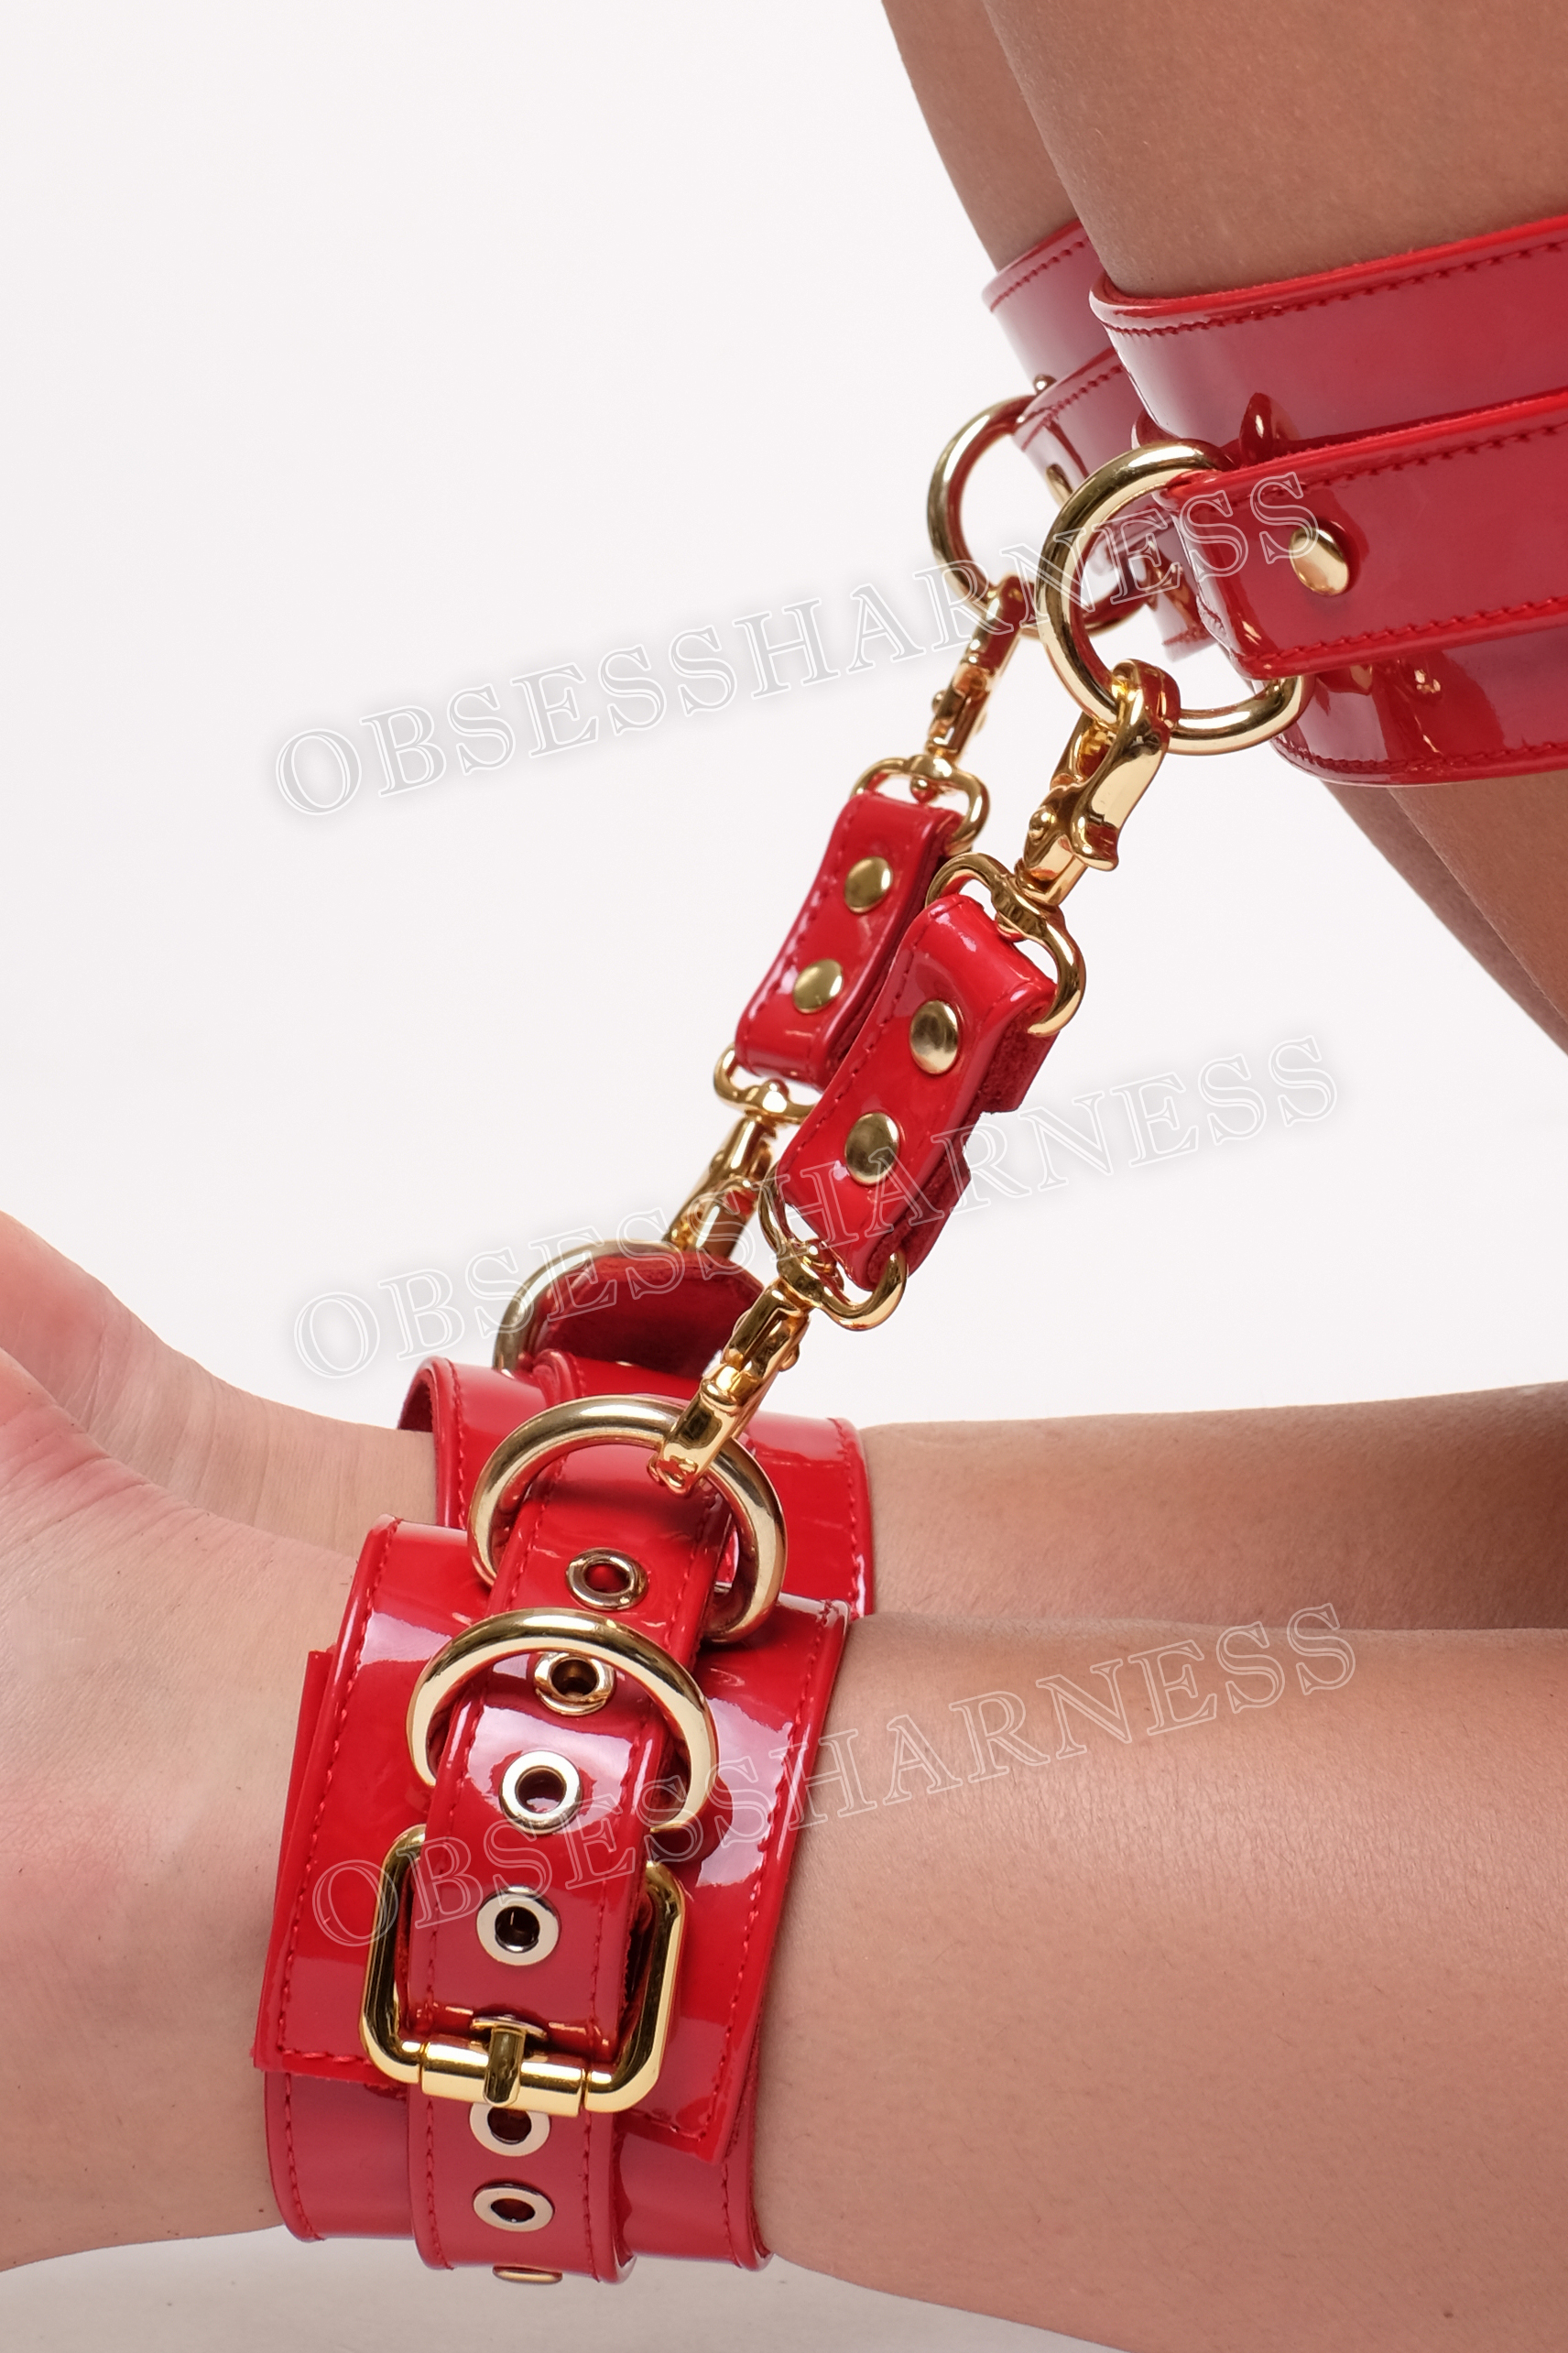 Leather bdsm thigh and ankle cuffs patent leather red for fastening a submissive from behind in a pig position the wrists and hips, equipped with rings 